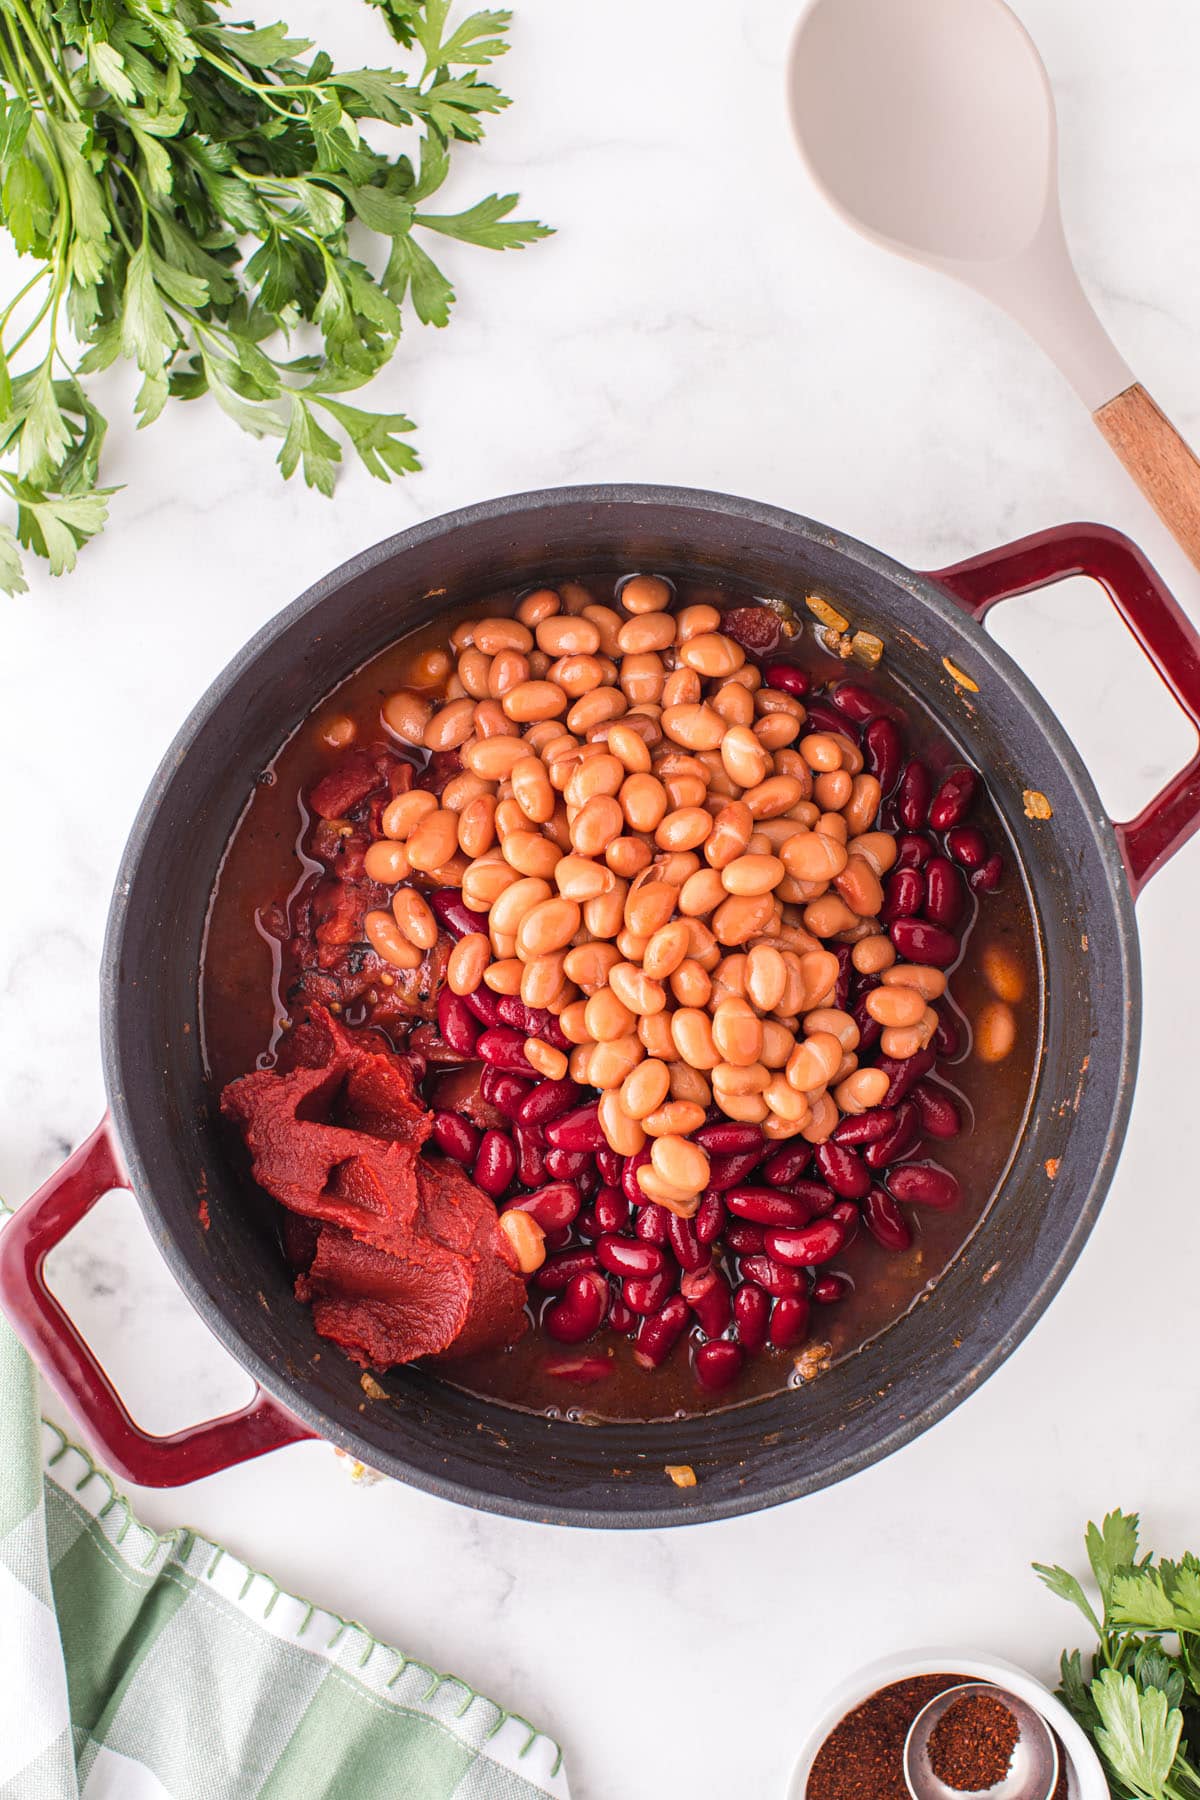 Mix in the kidney beans, pinto beans, fire roasted tomatoes, and tomato paste into the pot